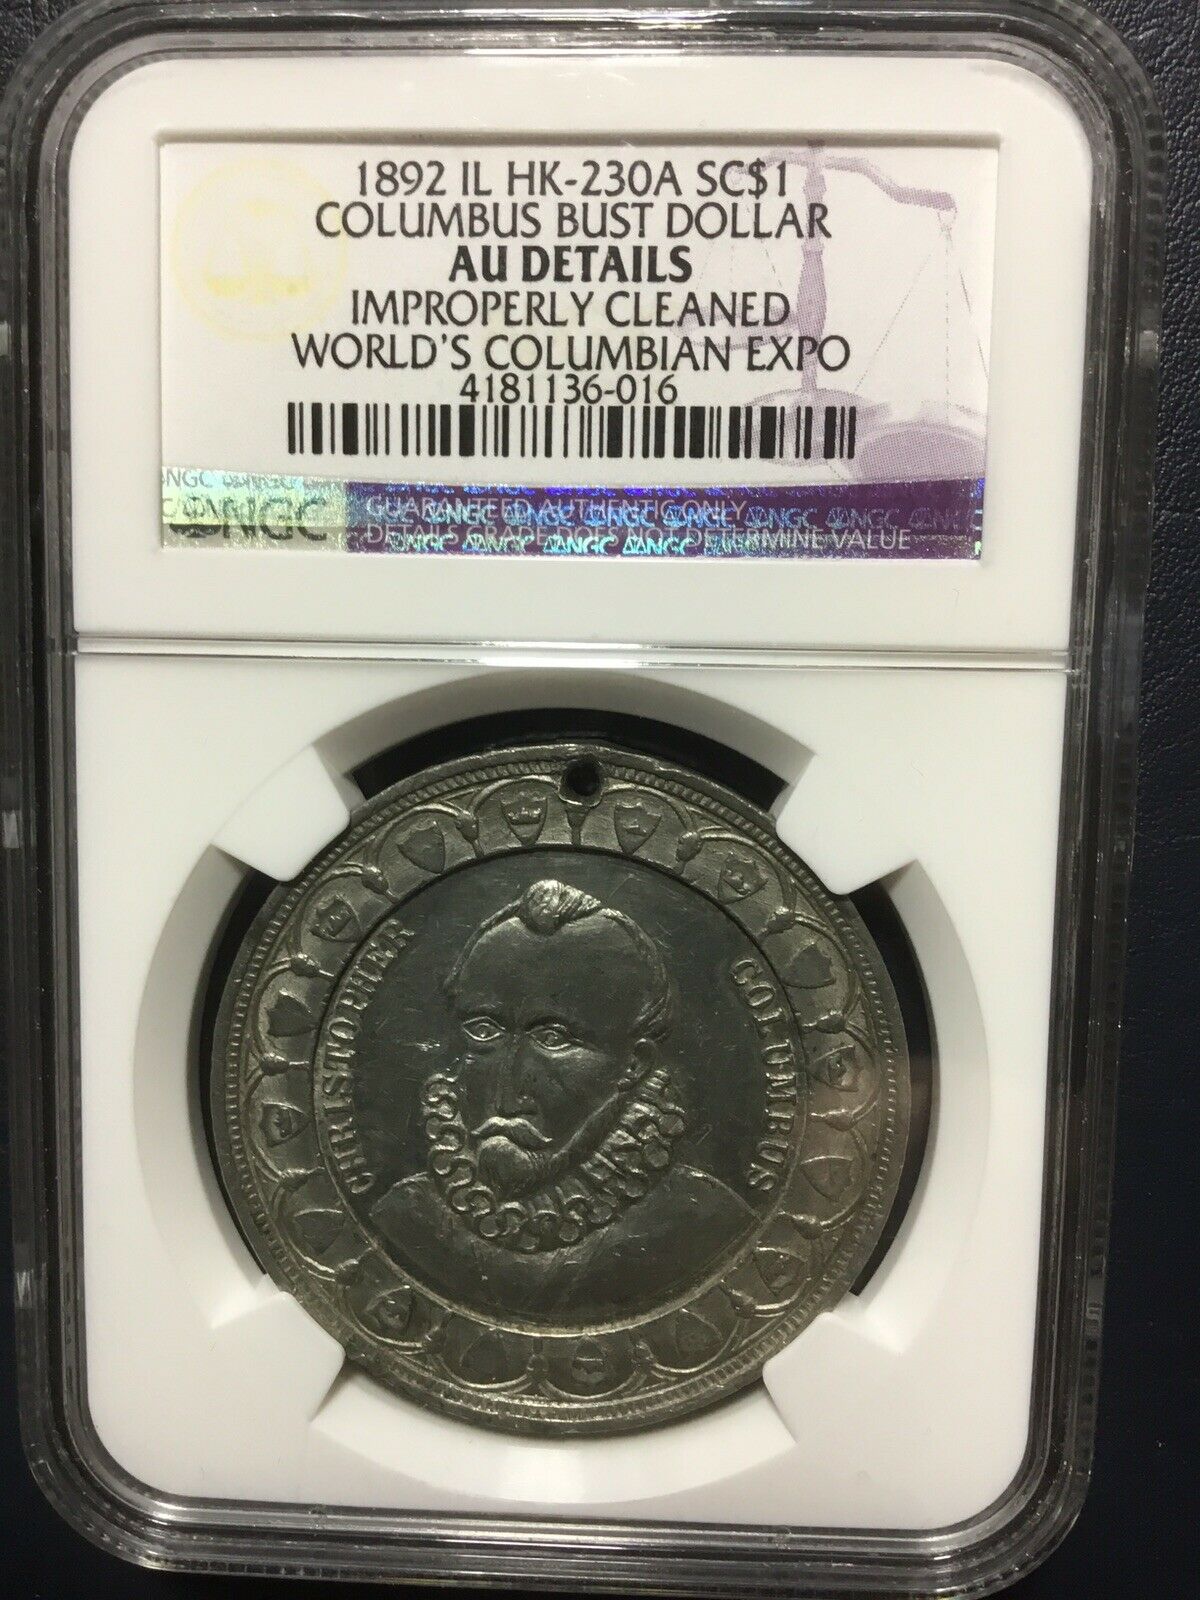 1892 Hk-230a World’s Columbian Expo Columbus Bust Dollar Ngc Au Details Cleaned